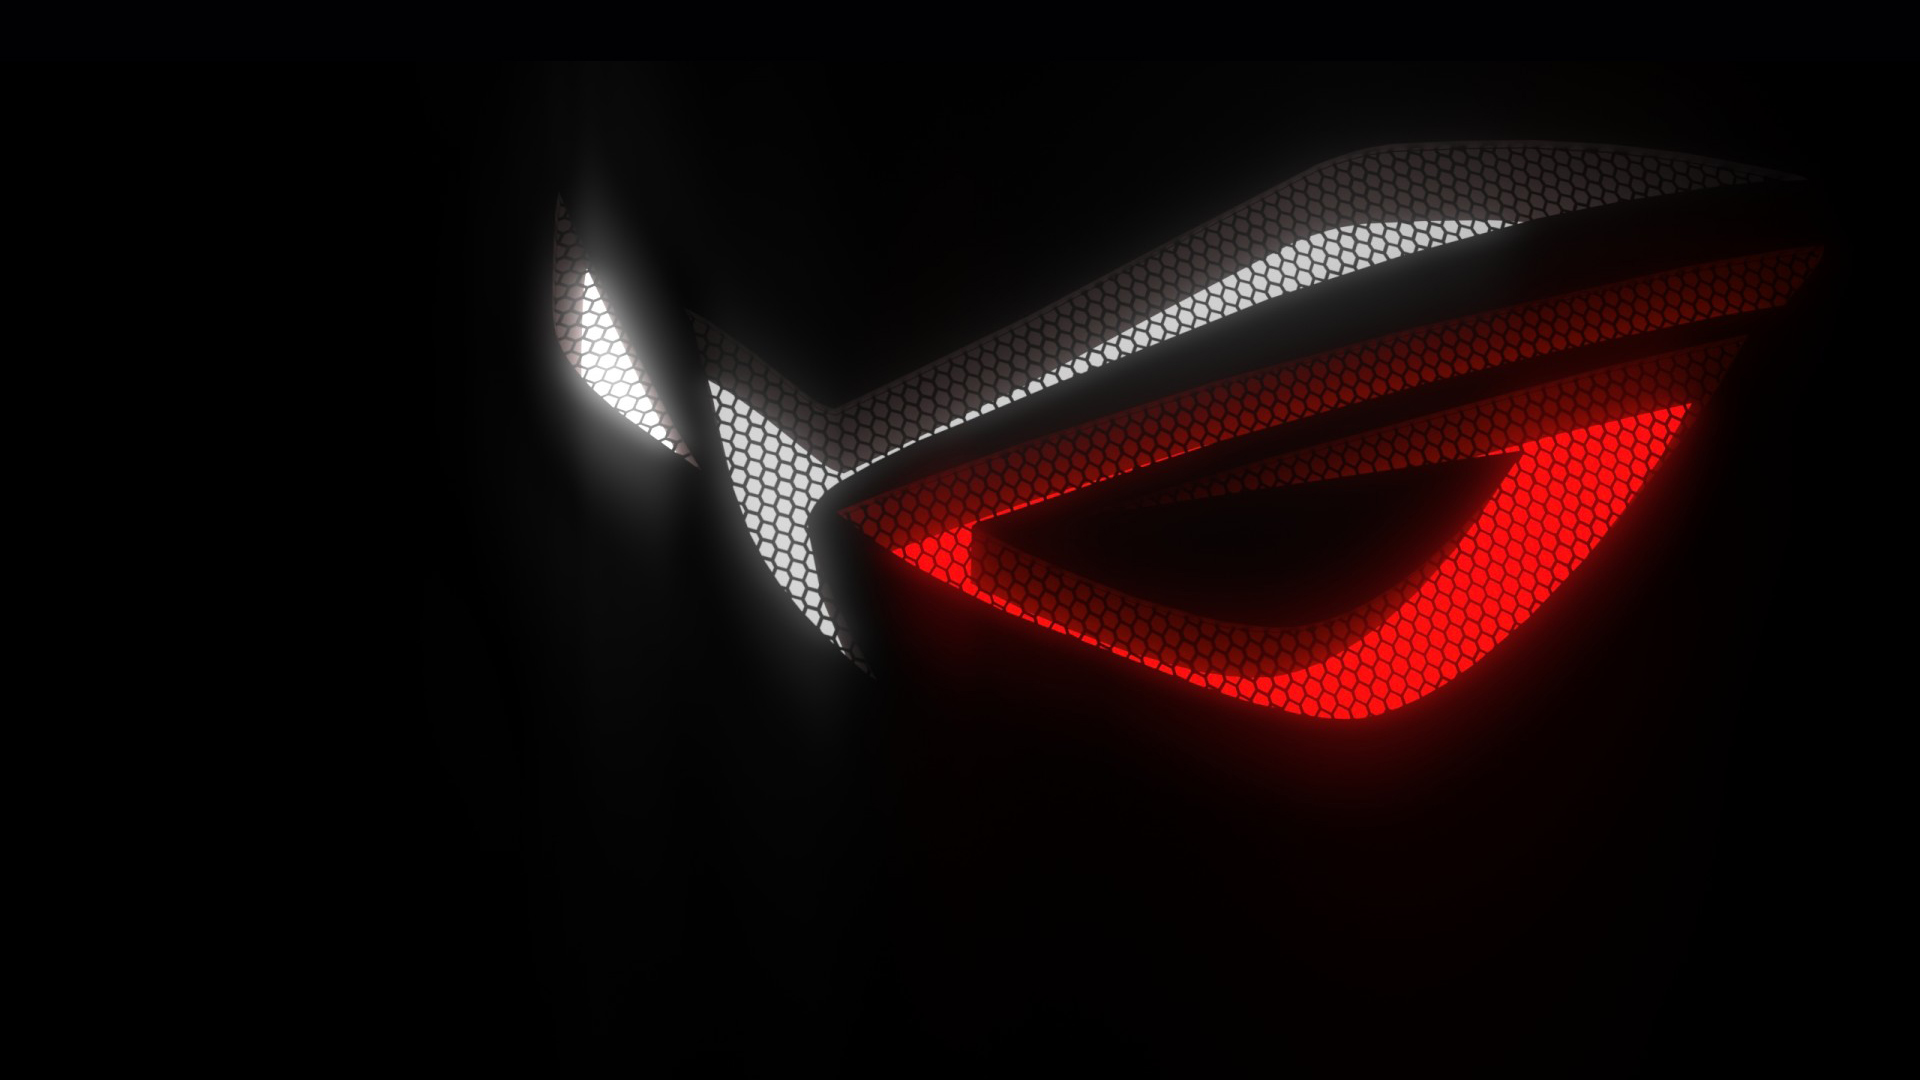 asus rog republic of gamers logo hex background hd 1920x1080 1080p 1920x1080